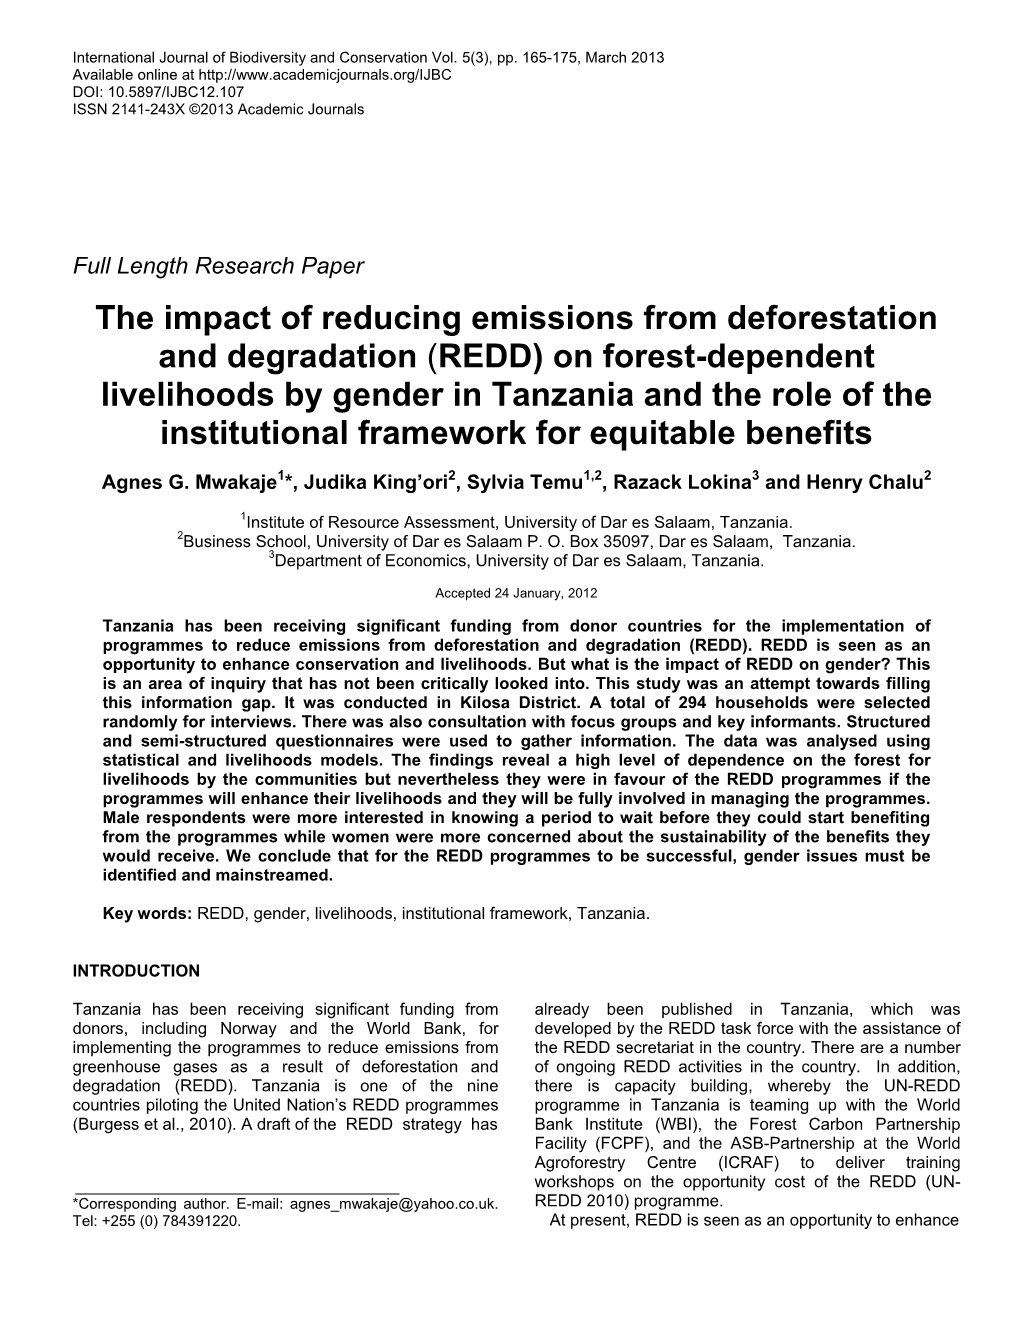 REDD) on Forest-Dependent Livelihoods by Gender in Tanzania and the Role of the Institutional Framework for Equitable Benefits